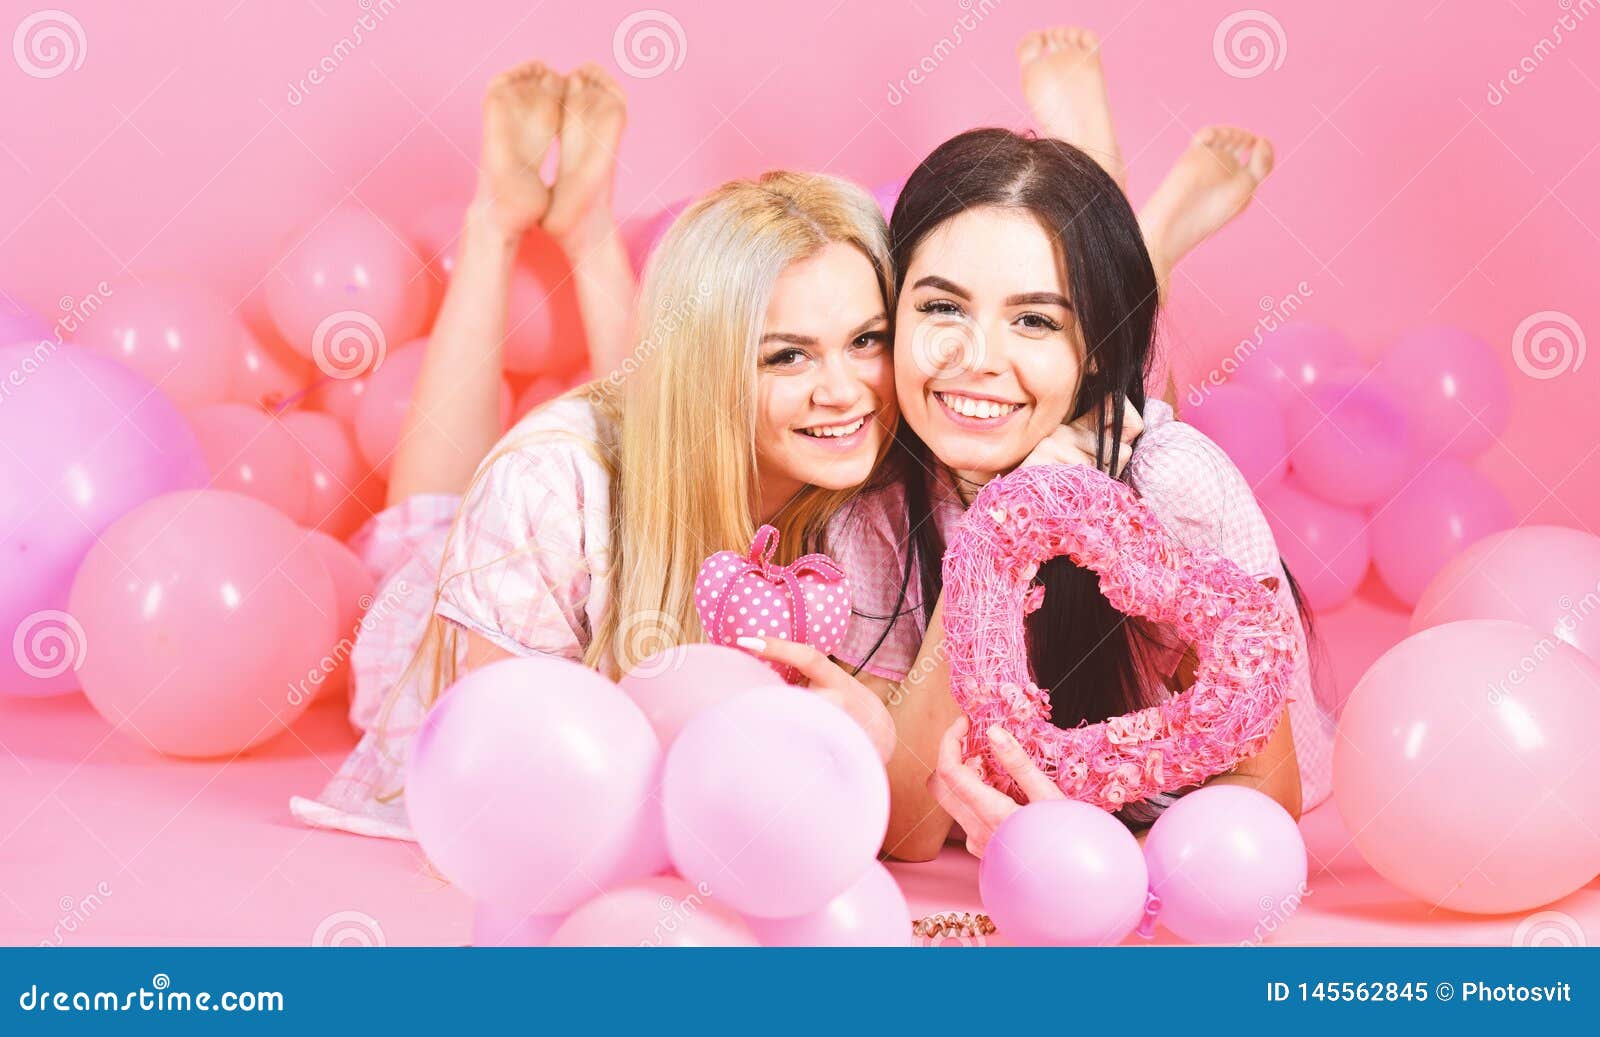 Valentines Day Concept Sisters Friends In Pajamas At Pajamas Party 